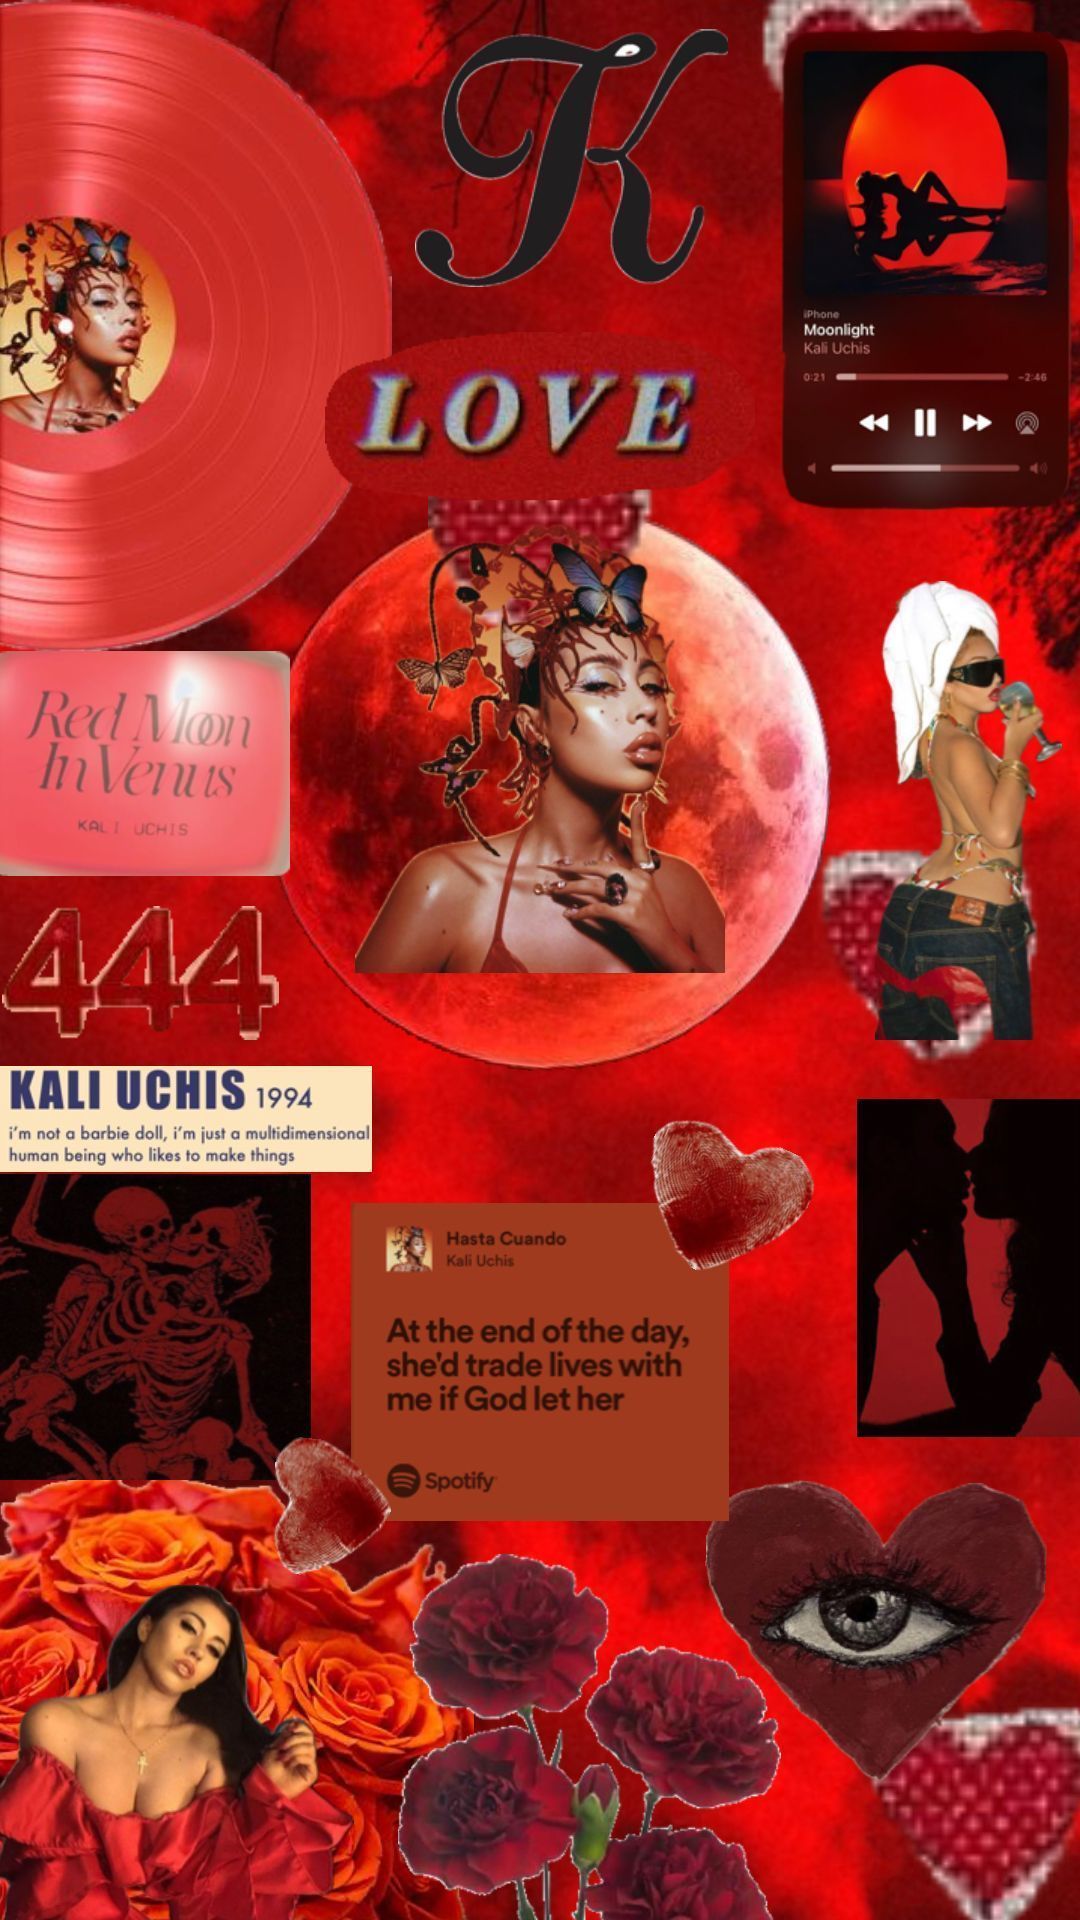 A collage of red aesthetic images including a red vinyl record, red roses, and a picture of singer Kali Uchis. - Kali Uchis